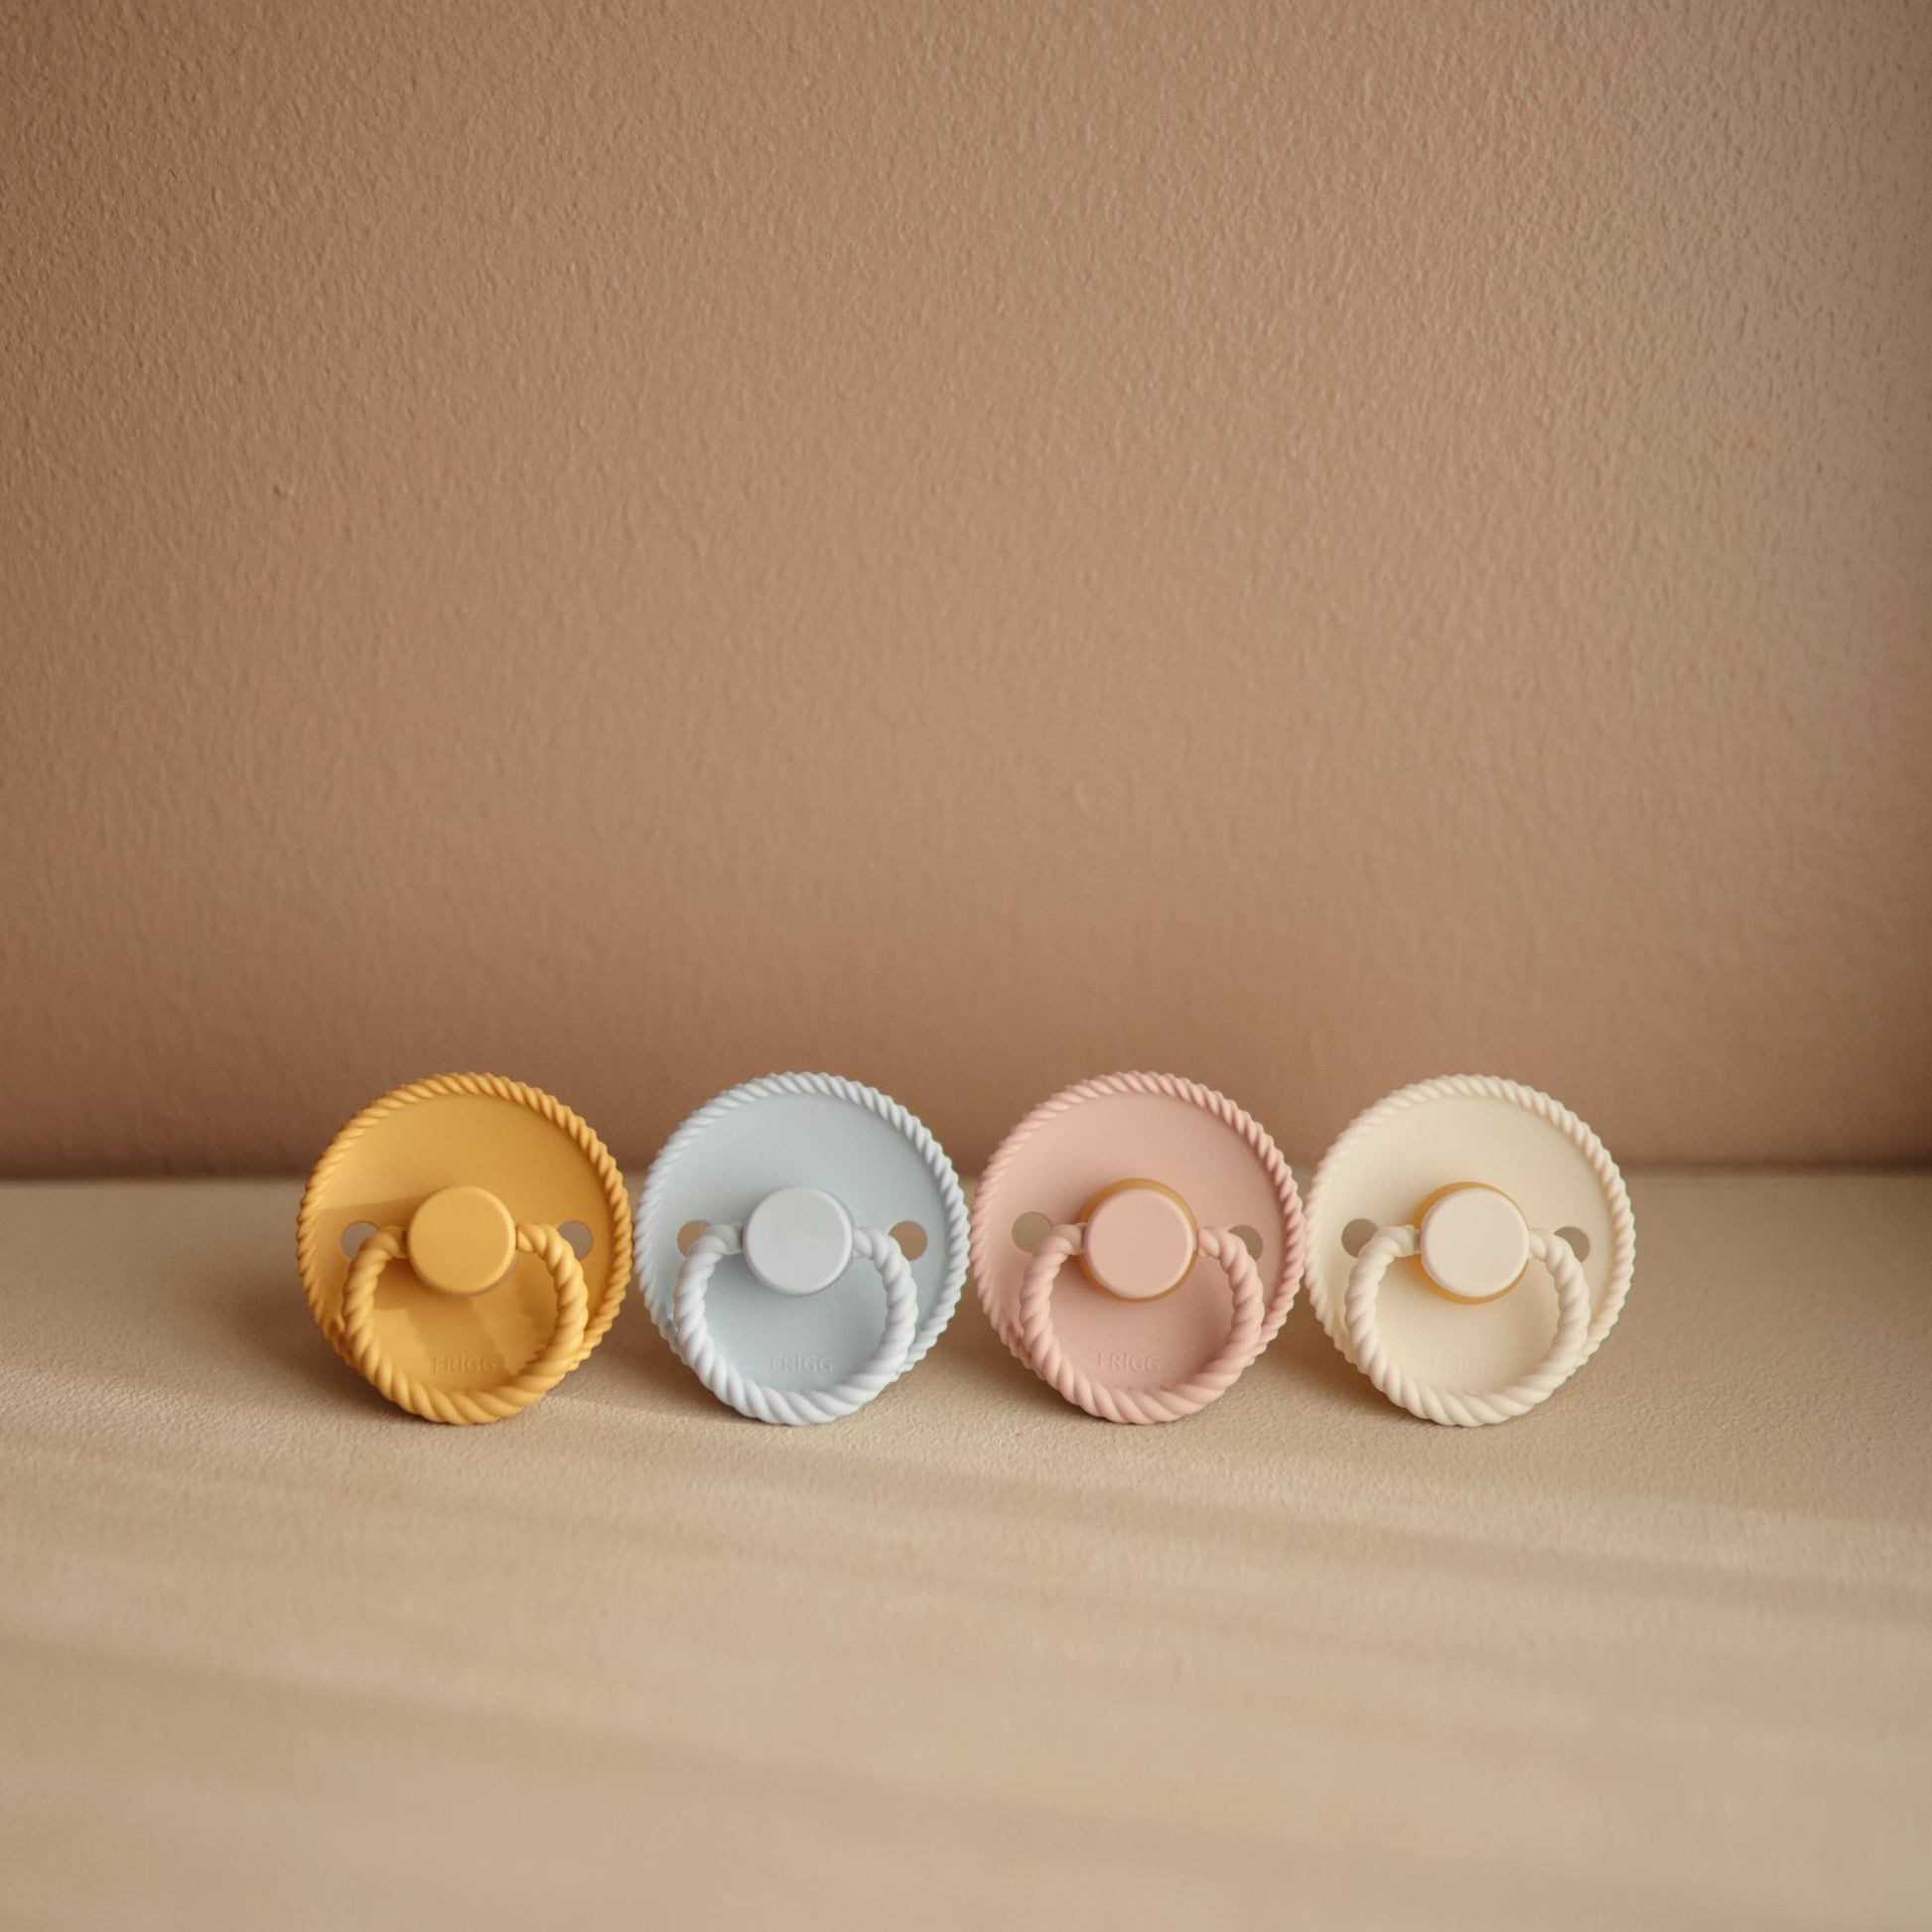 Frigg Rope Latex Baby Pacifier 6M-18M, 1Pack, Cream - Size 2 - Laadlee